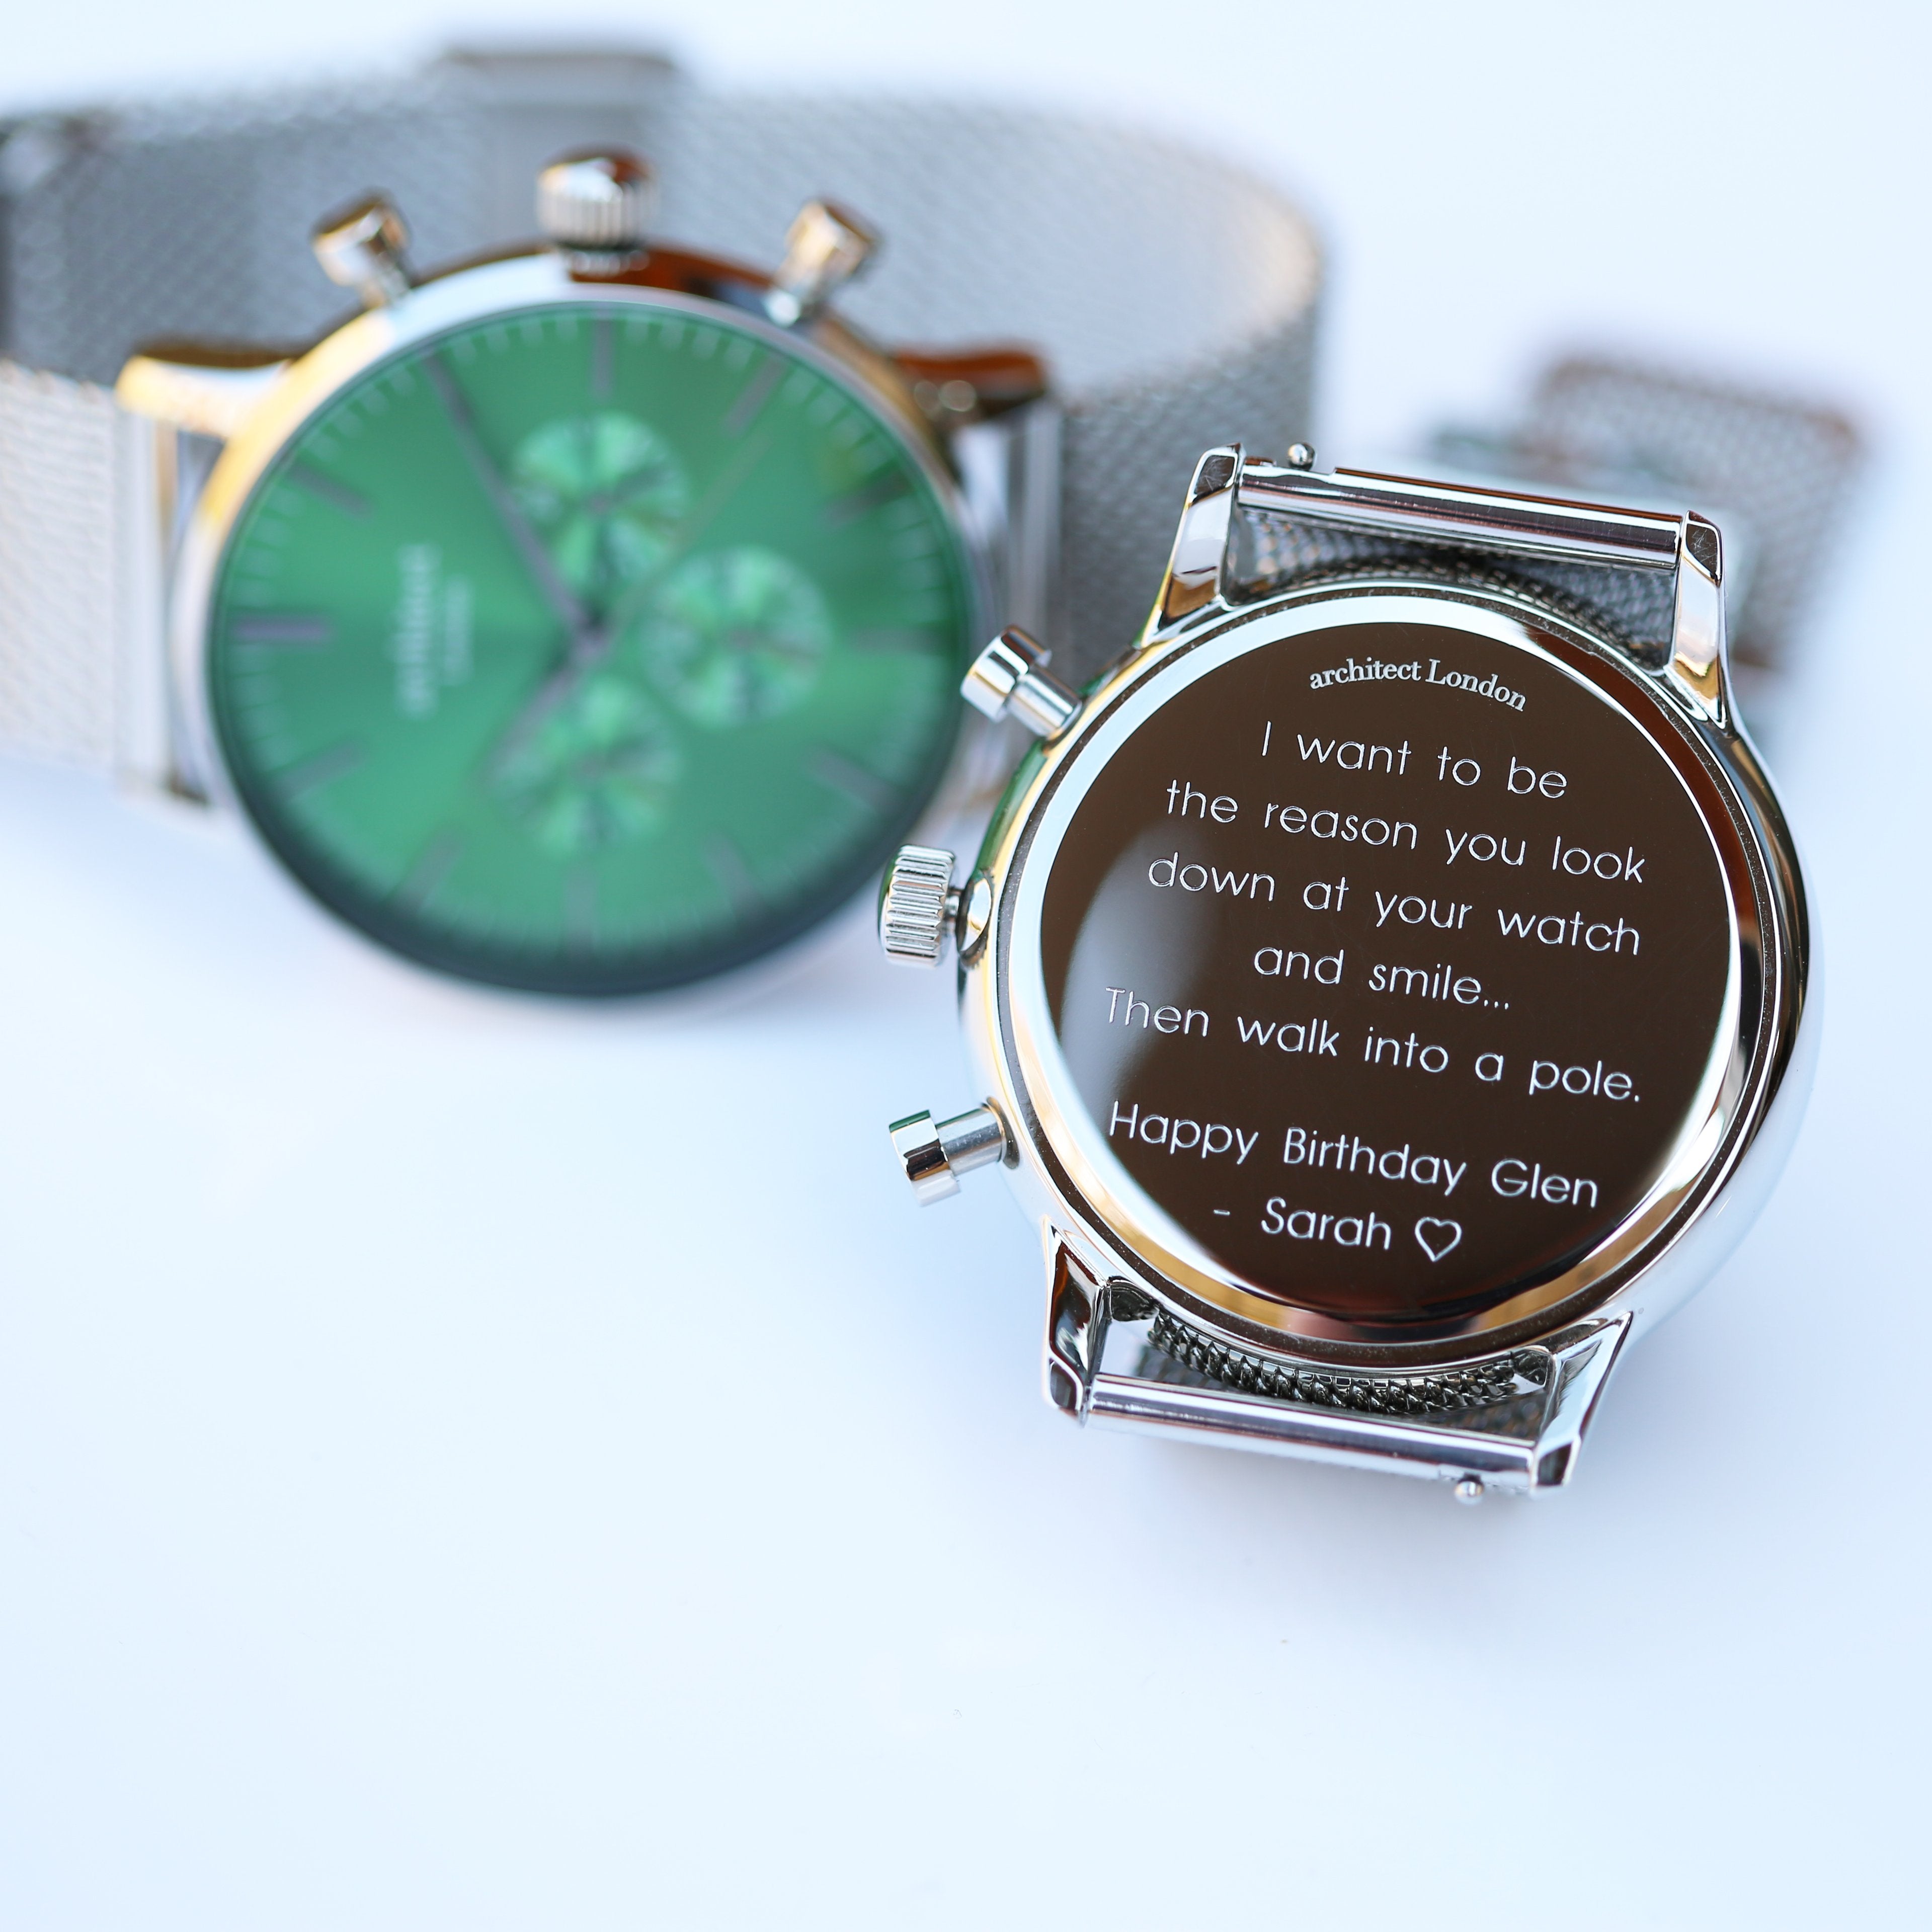 Men's Architect Motivator In Envy Green With Silver Mesh Strap - Modern Font Engraving